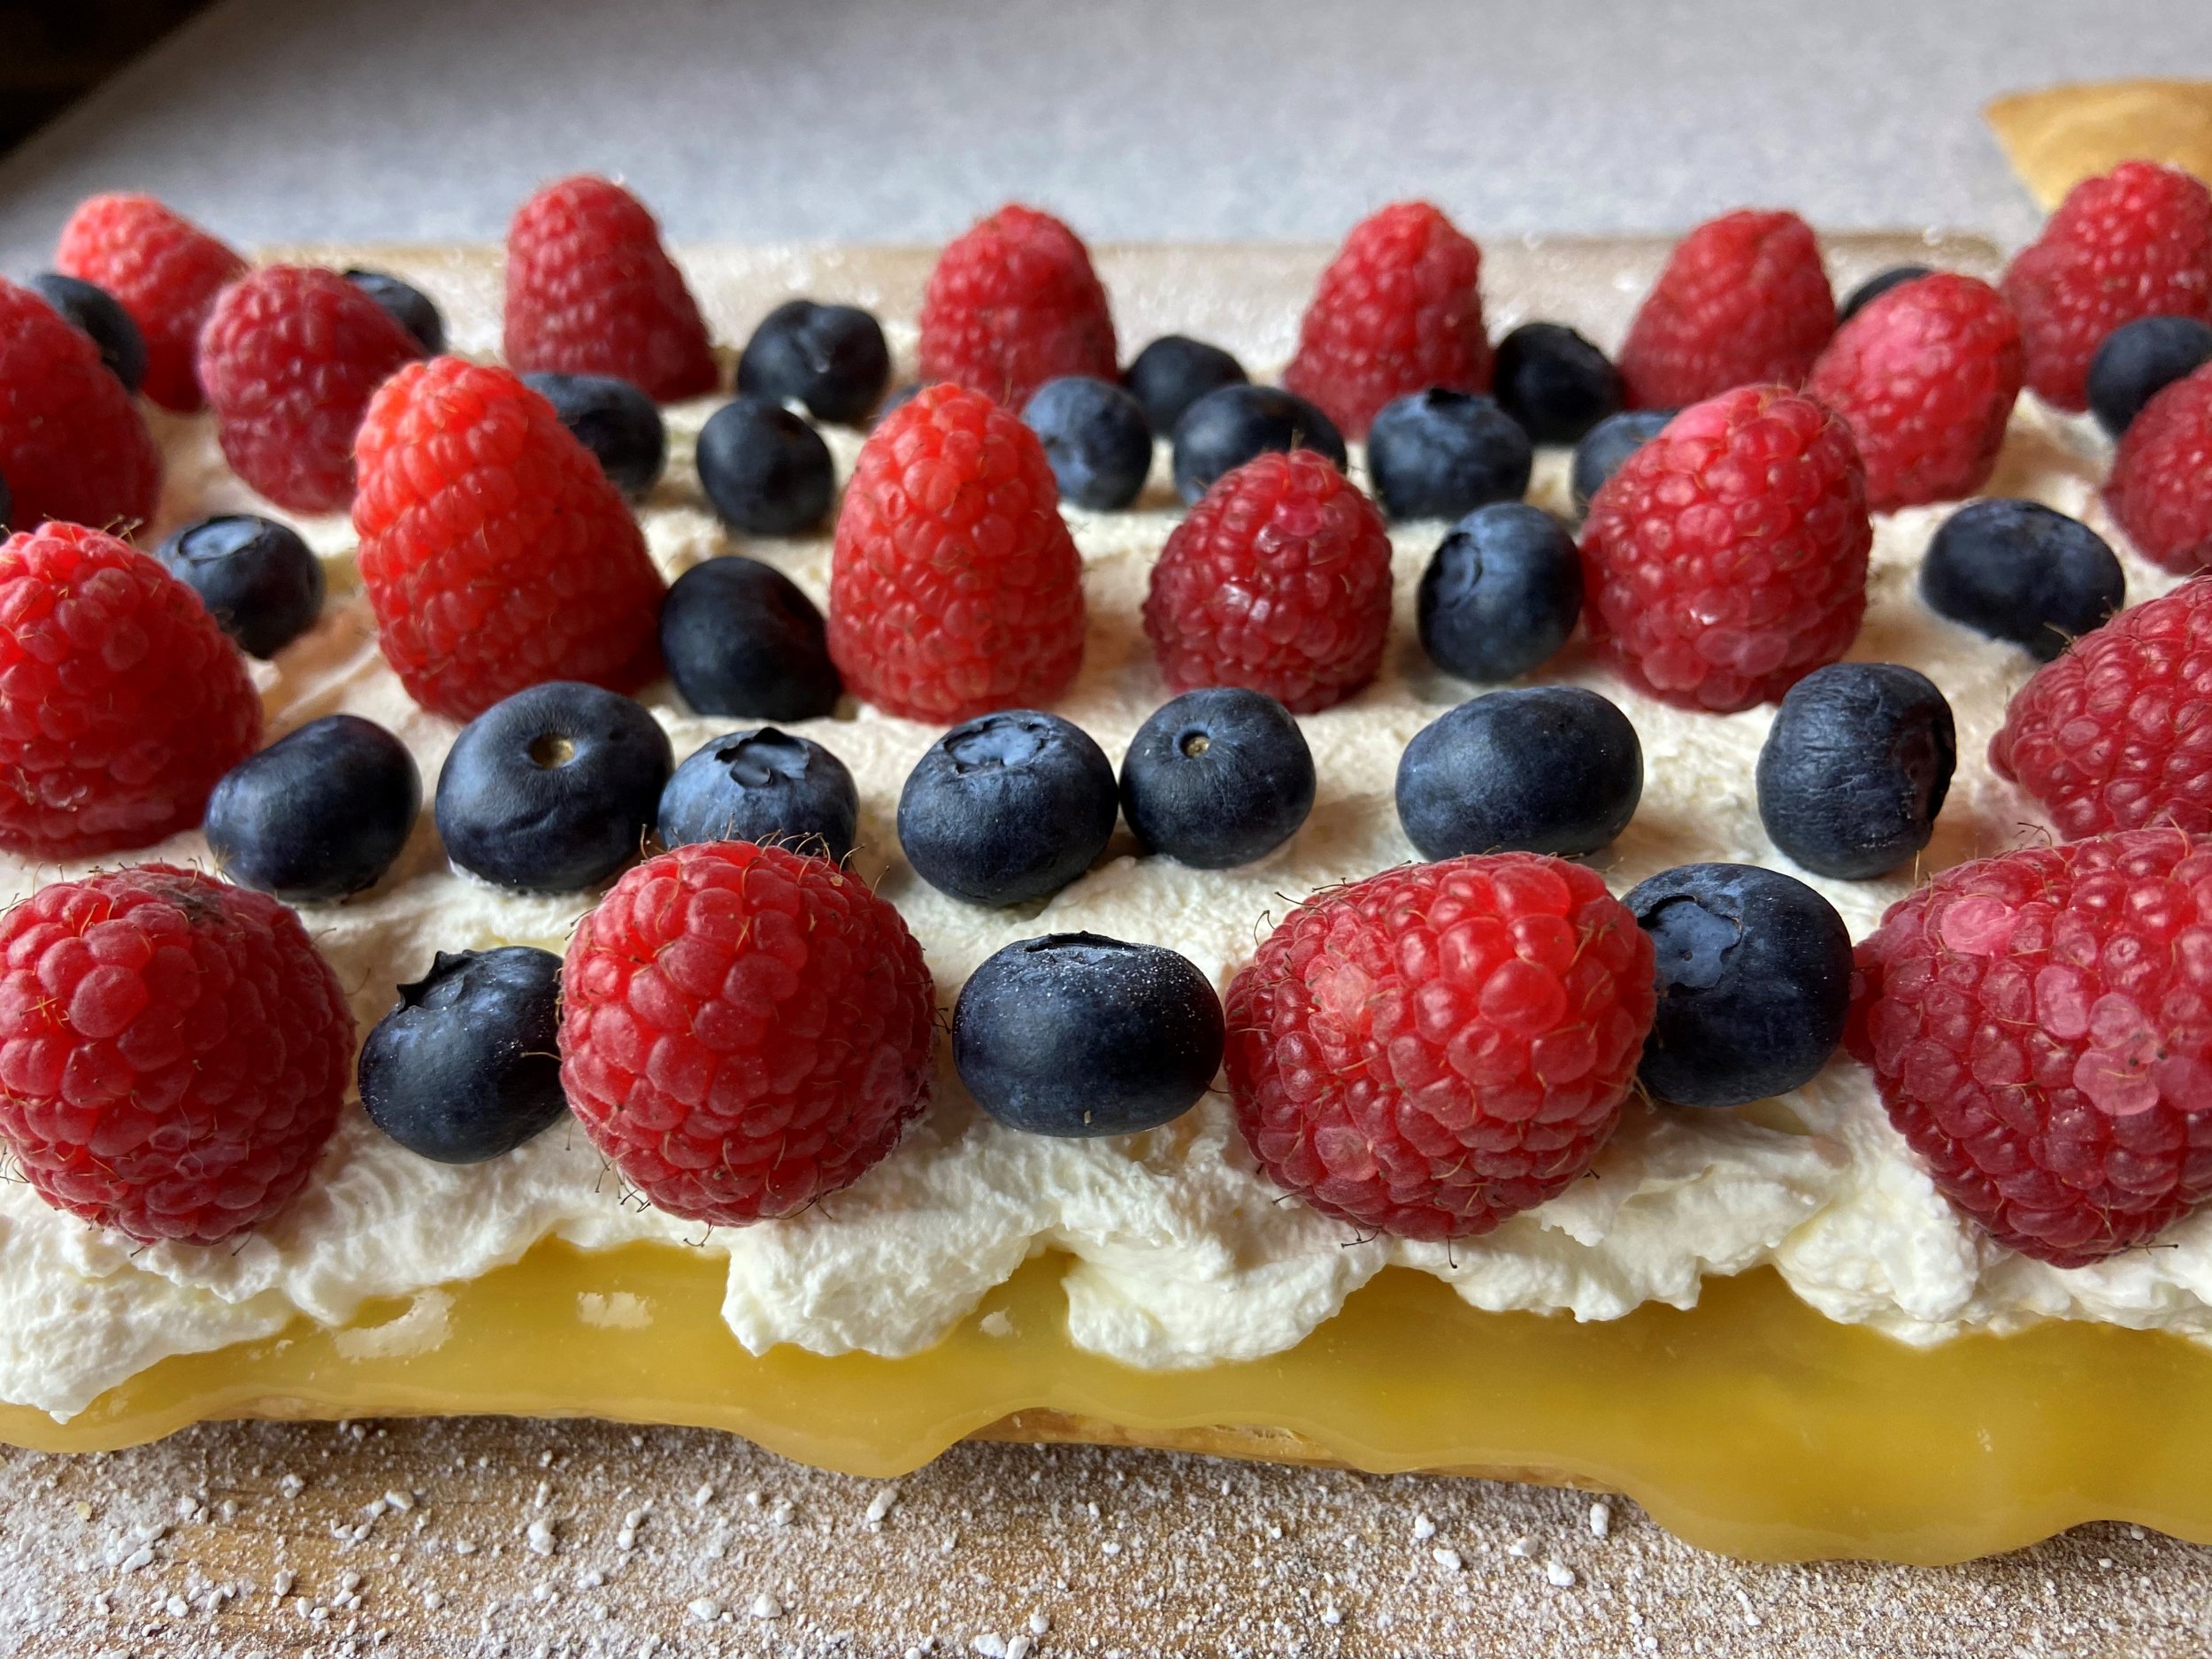 Image of Cover with fresh raspberries and blueberries